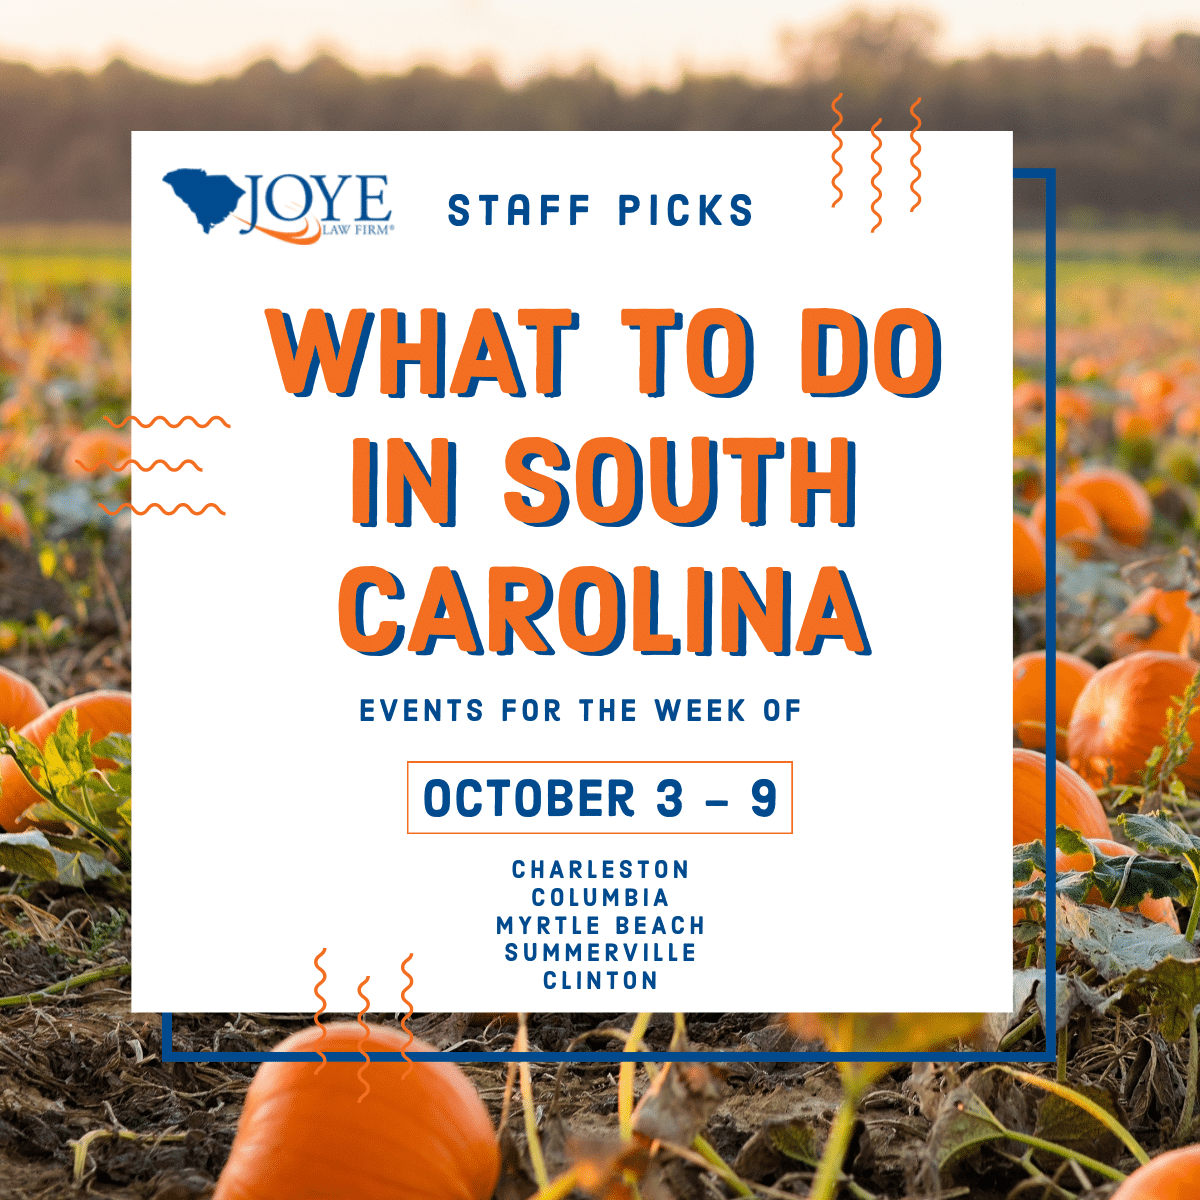 What to do in South Carolina events for the week of October 3-9 for Charleston, Columbia, Myrtle Beach, Summerville and upstate